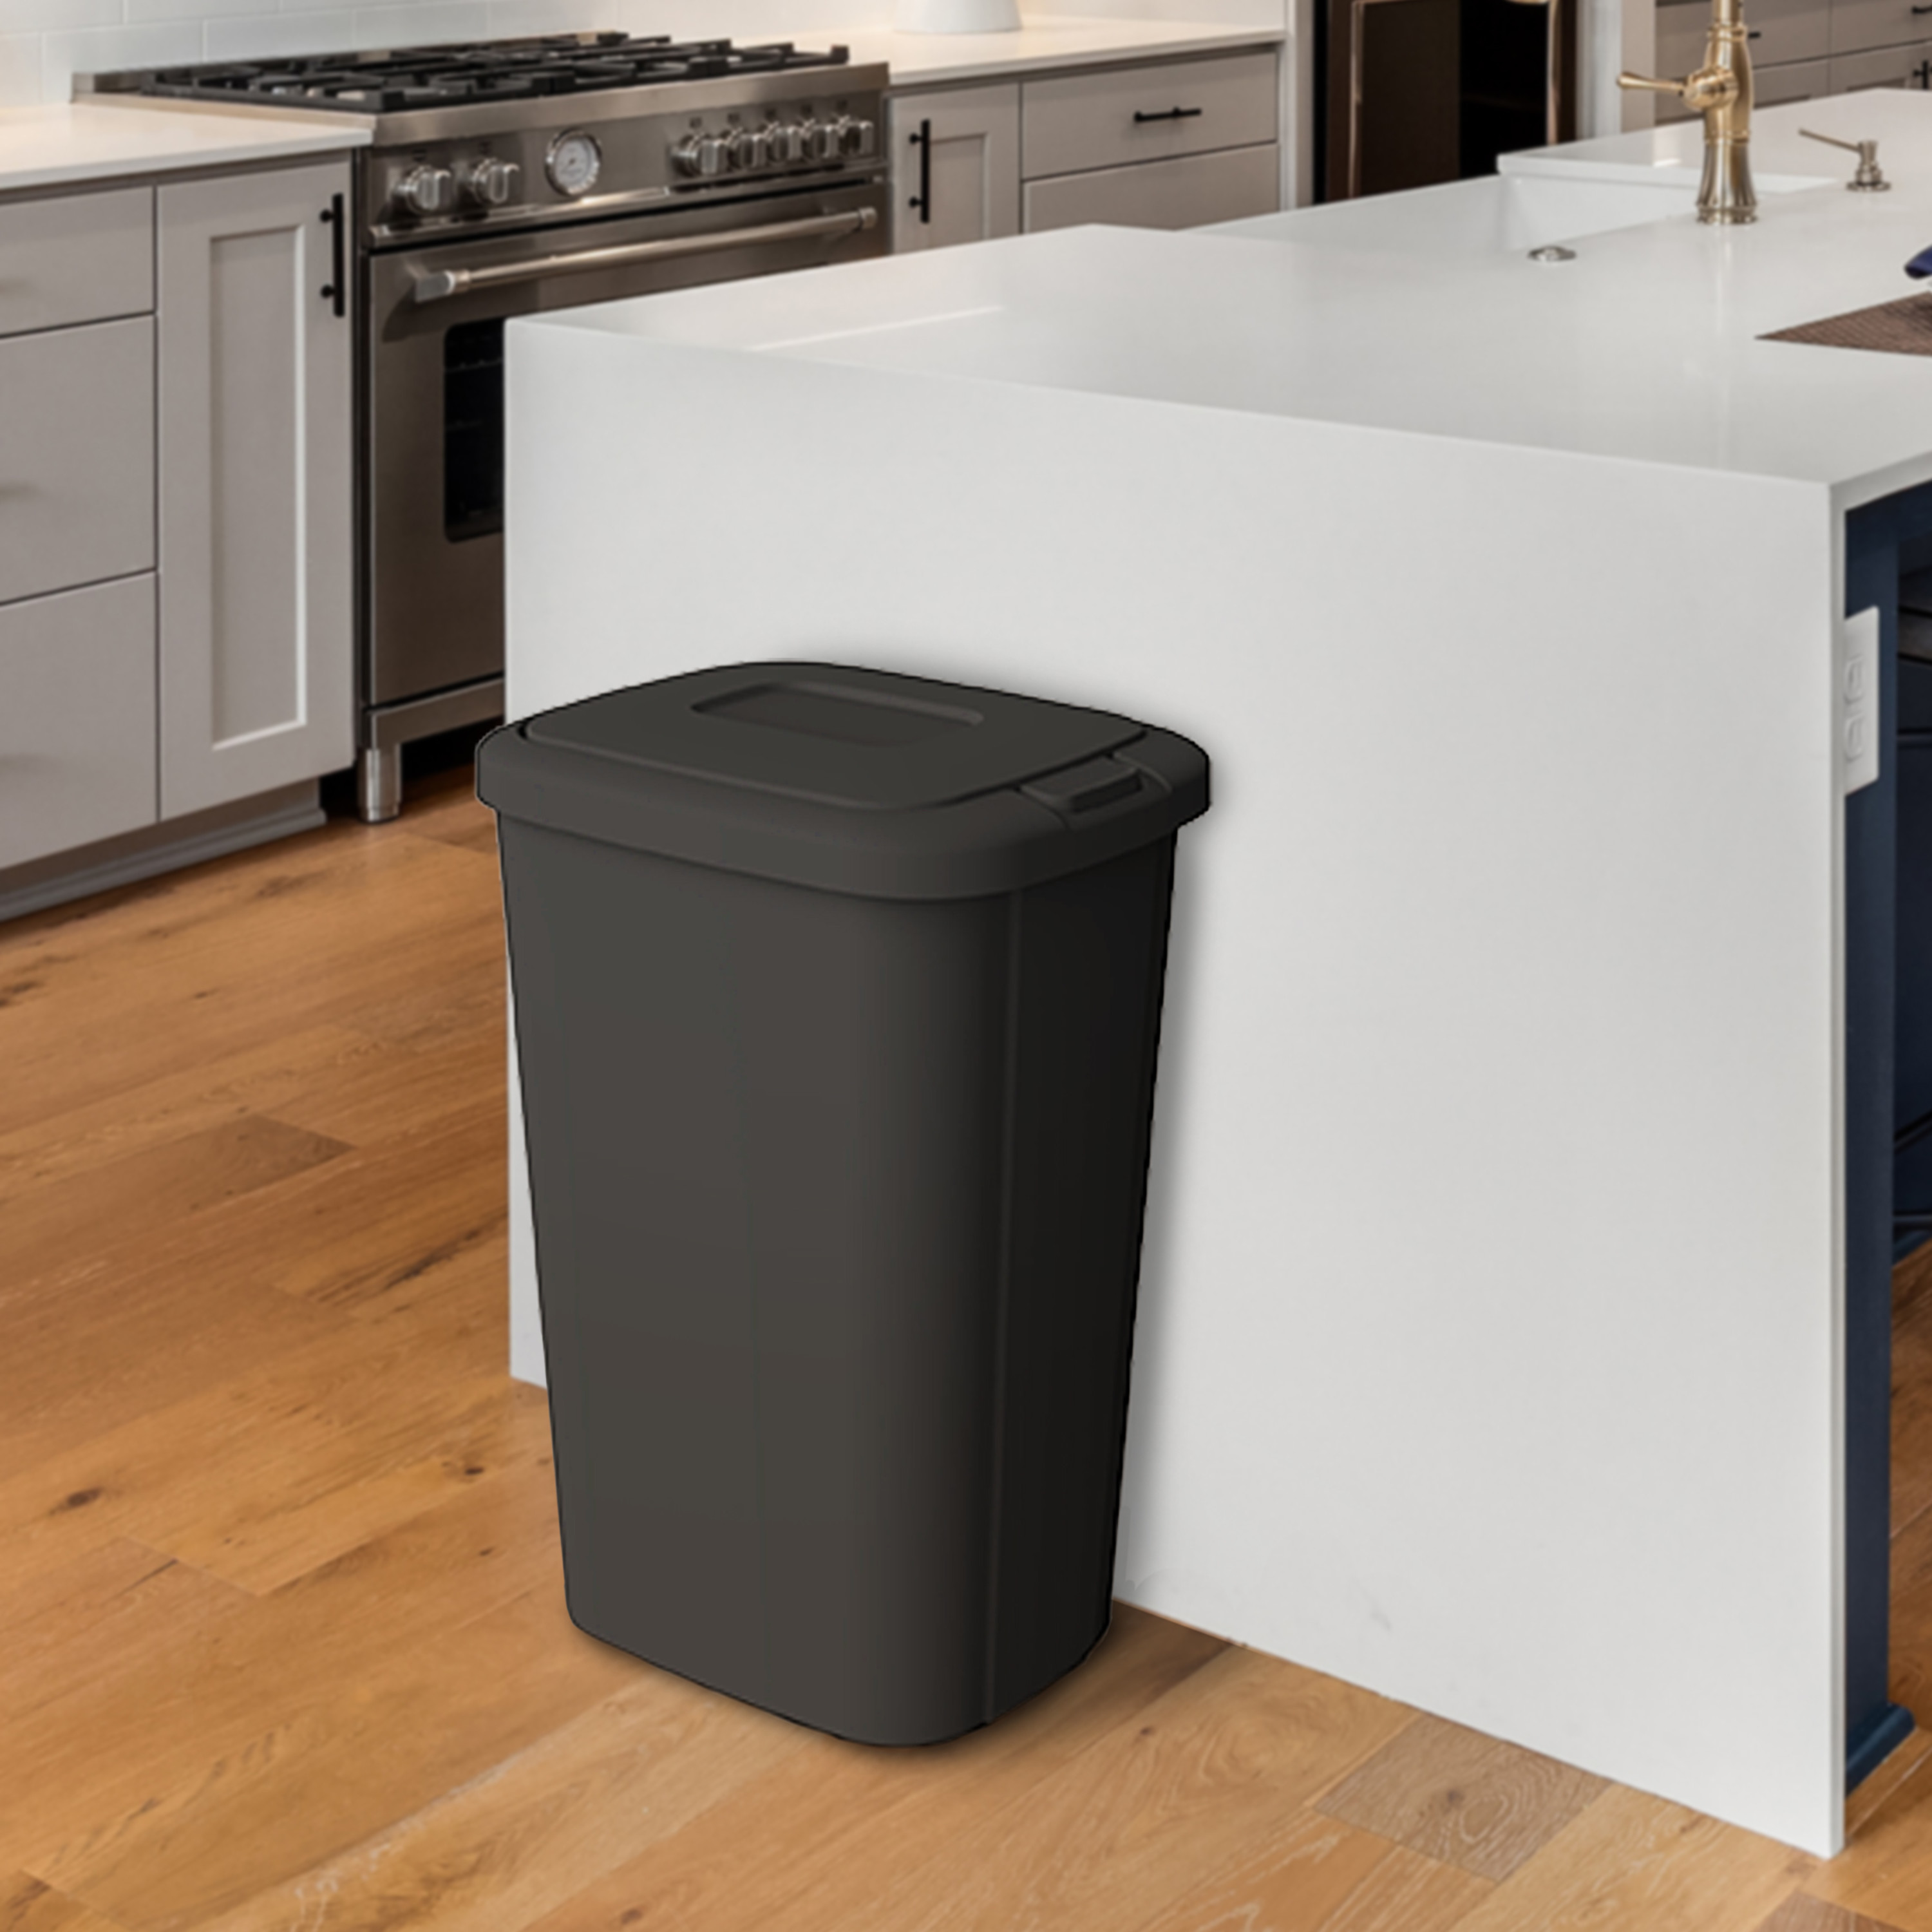 Hefty 13.3 Gallon Trash Can, Plastic Touch Top Kitchen Trash Can, Black - image 3 of 8